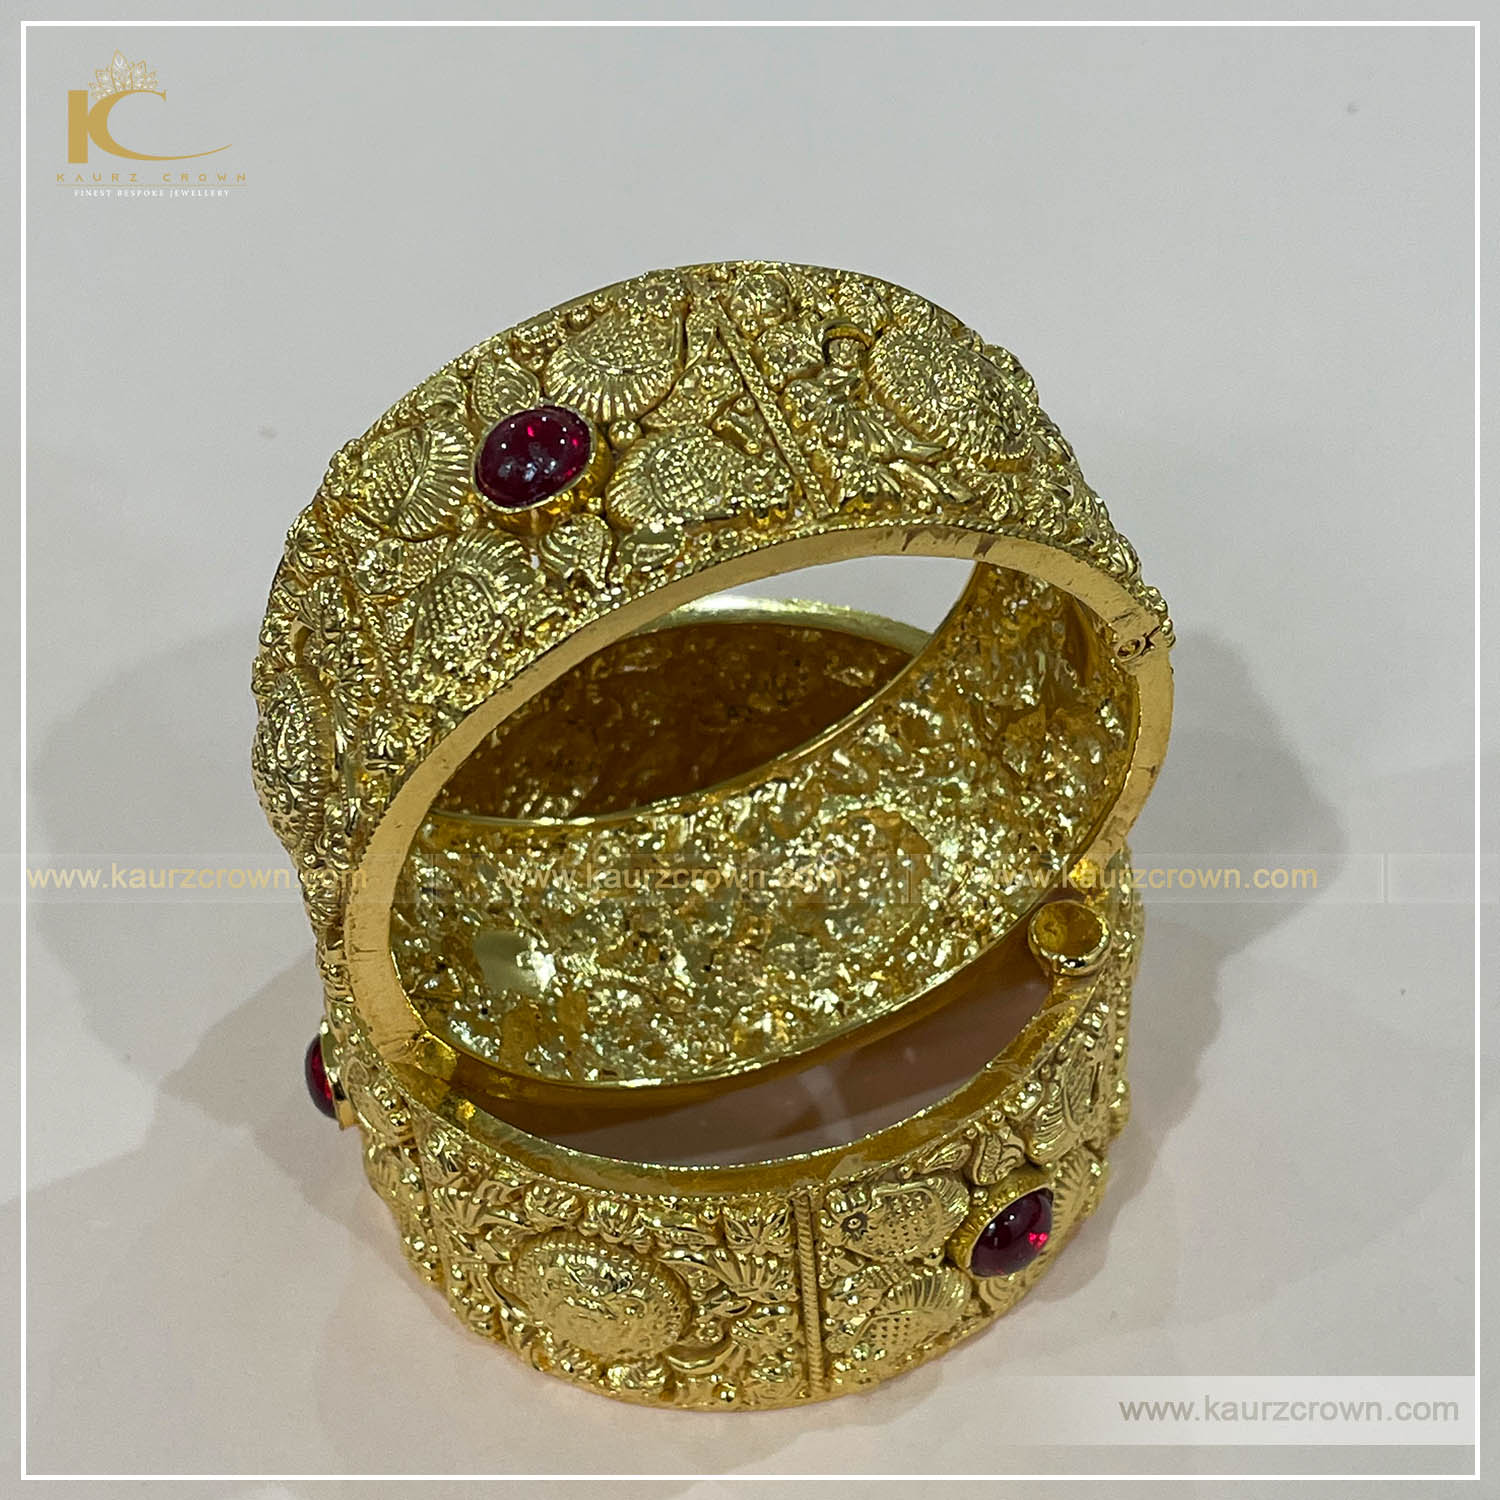 Ruksaba Traditional Antique Gold Plated Bangles – KaurzCrown.com